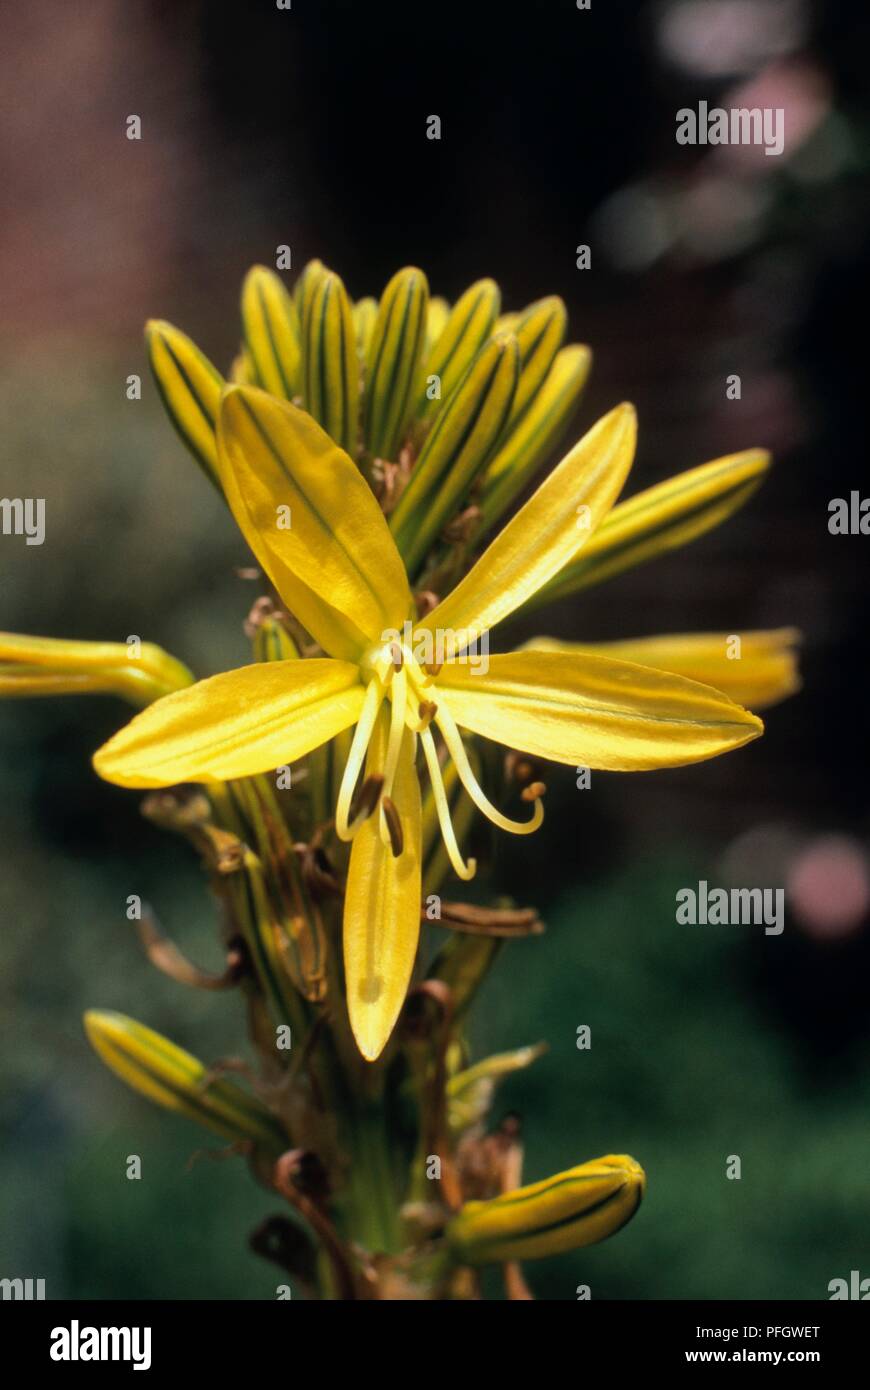 Yellow flowers from Asphodeline lutea (King's spear), close-up Stock Photo